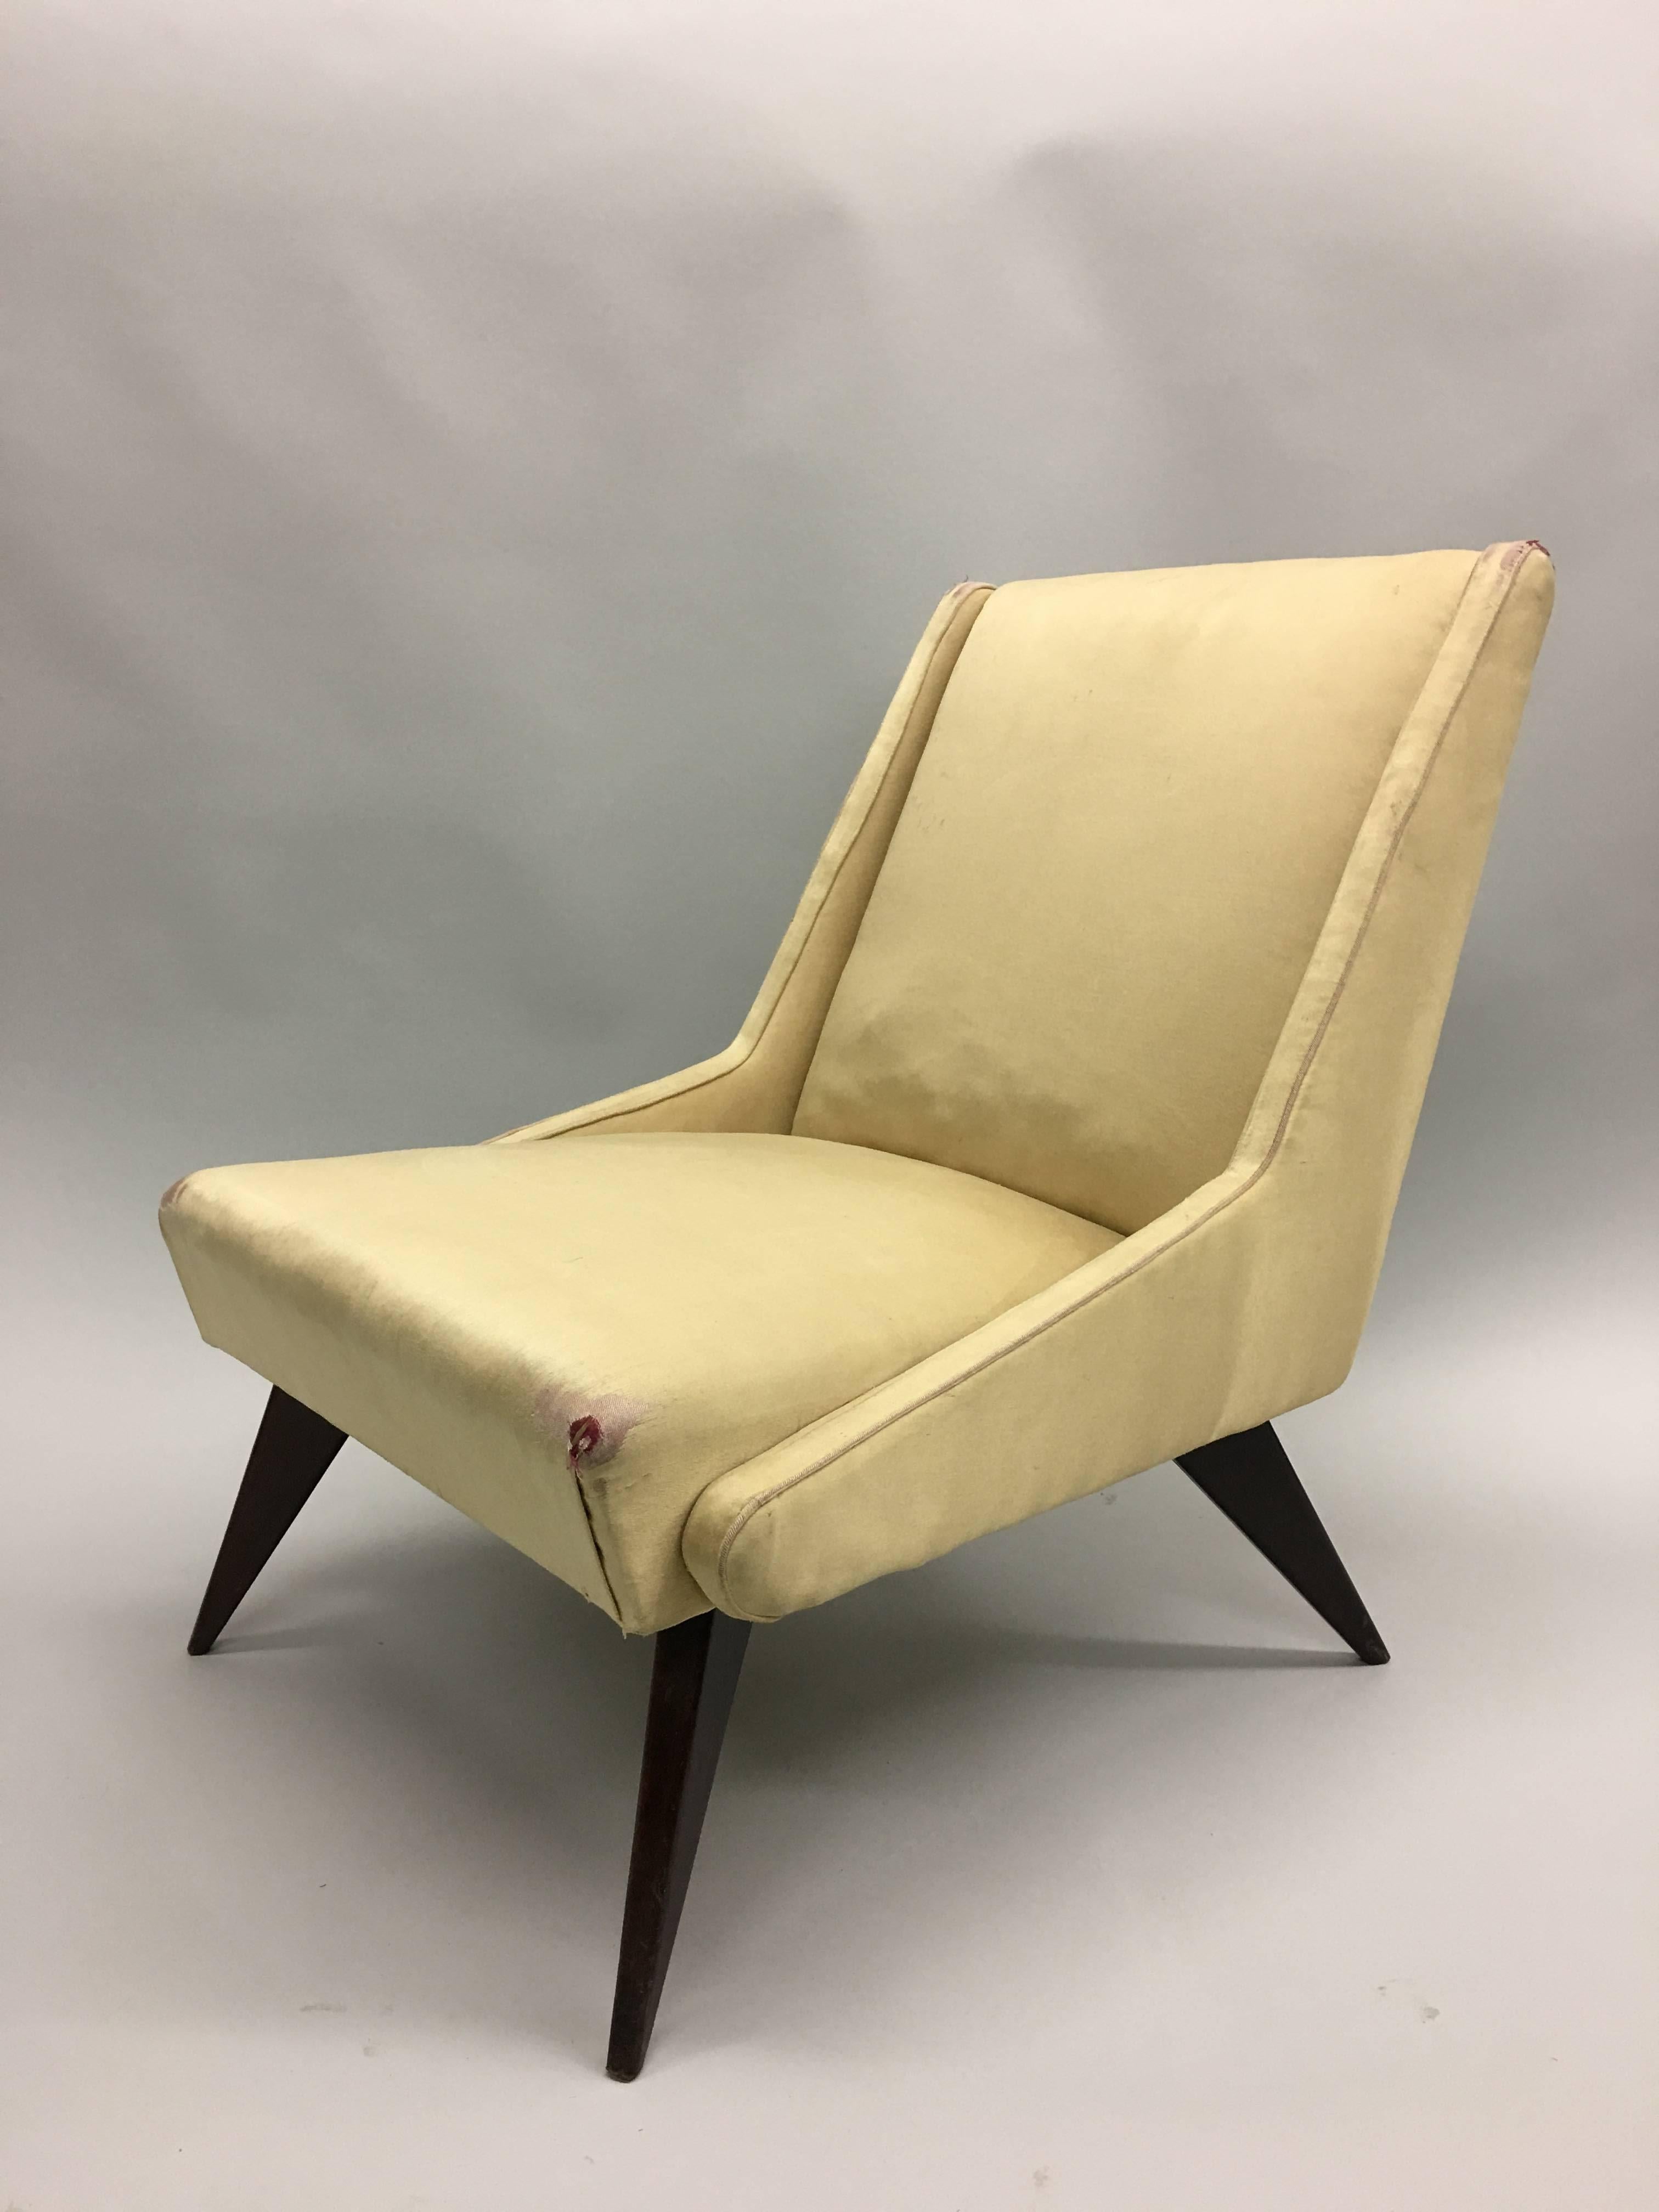 Iconic pair of Italian 1950s armchairs by ISA in hardwood and upholstery resting on splayed, tapered legs and featuring elegant angled arm-rests / side supports. Sober and sensuous masterpieces of design. 

Seat height is 13”
Priced and sold by the